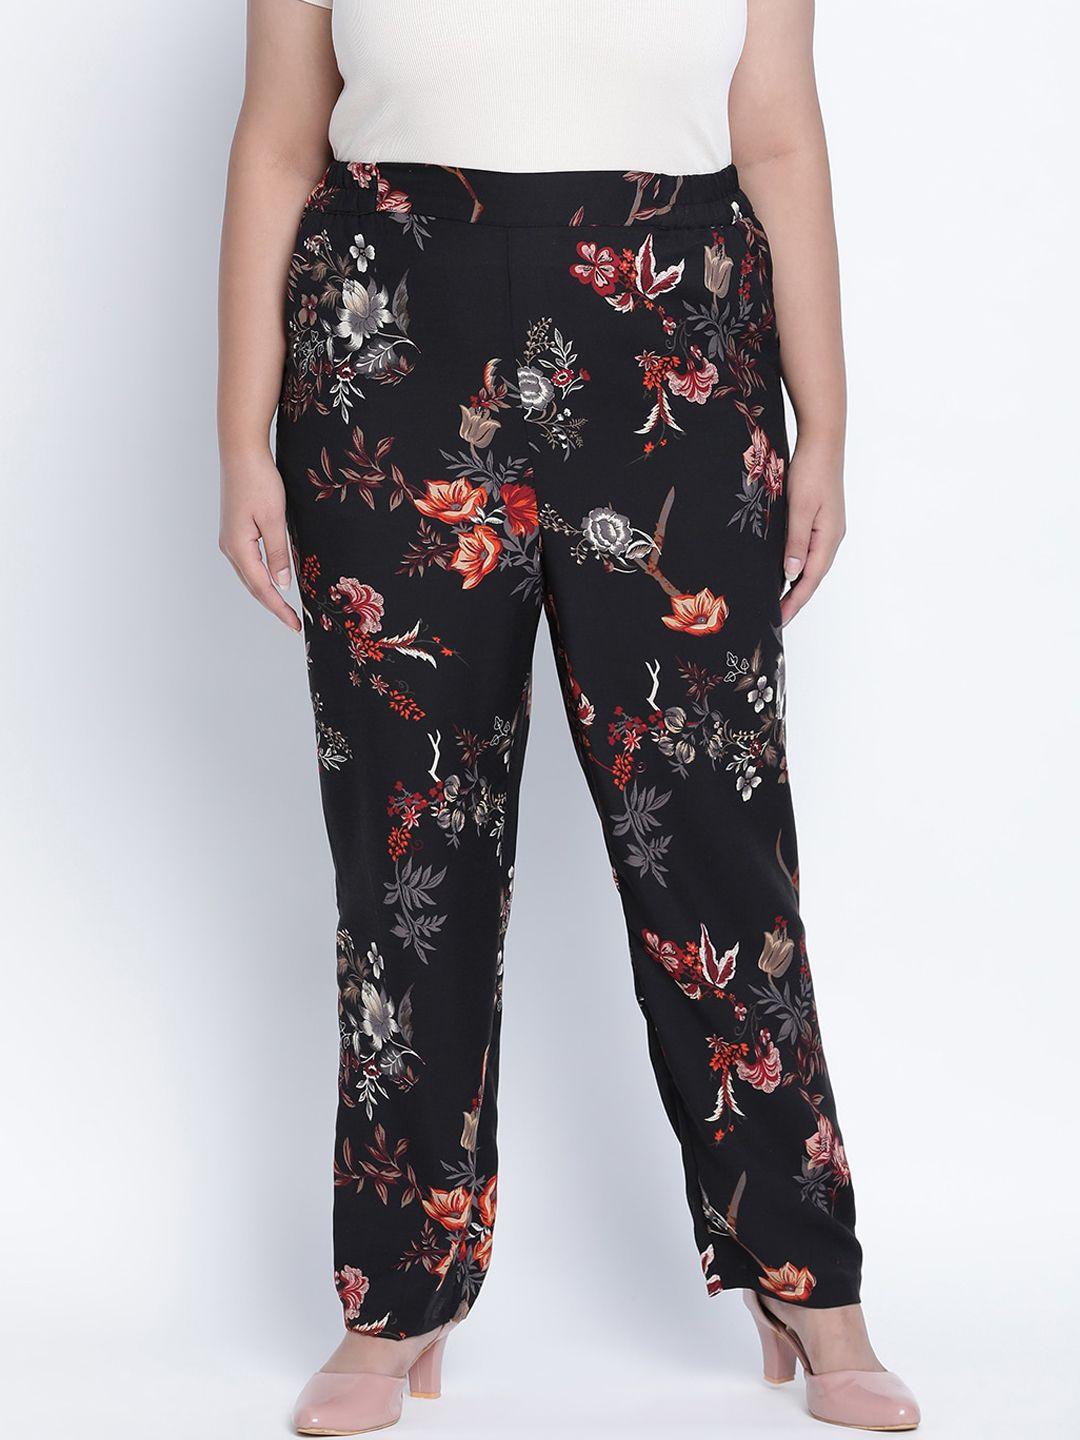 oxolloxo women black floral printed plus size trousers